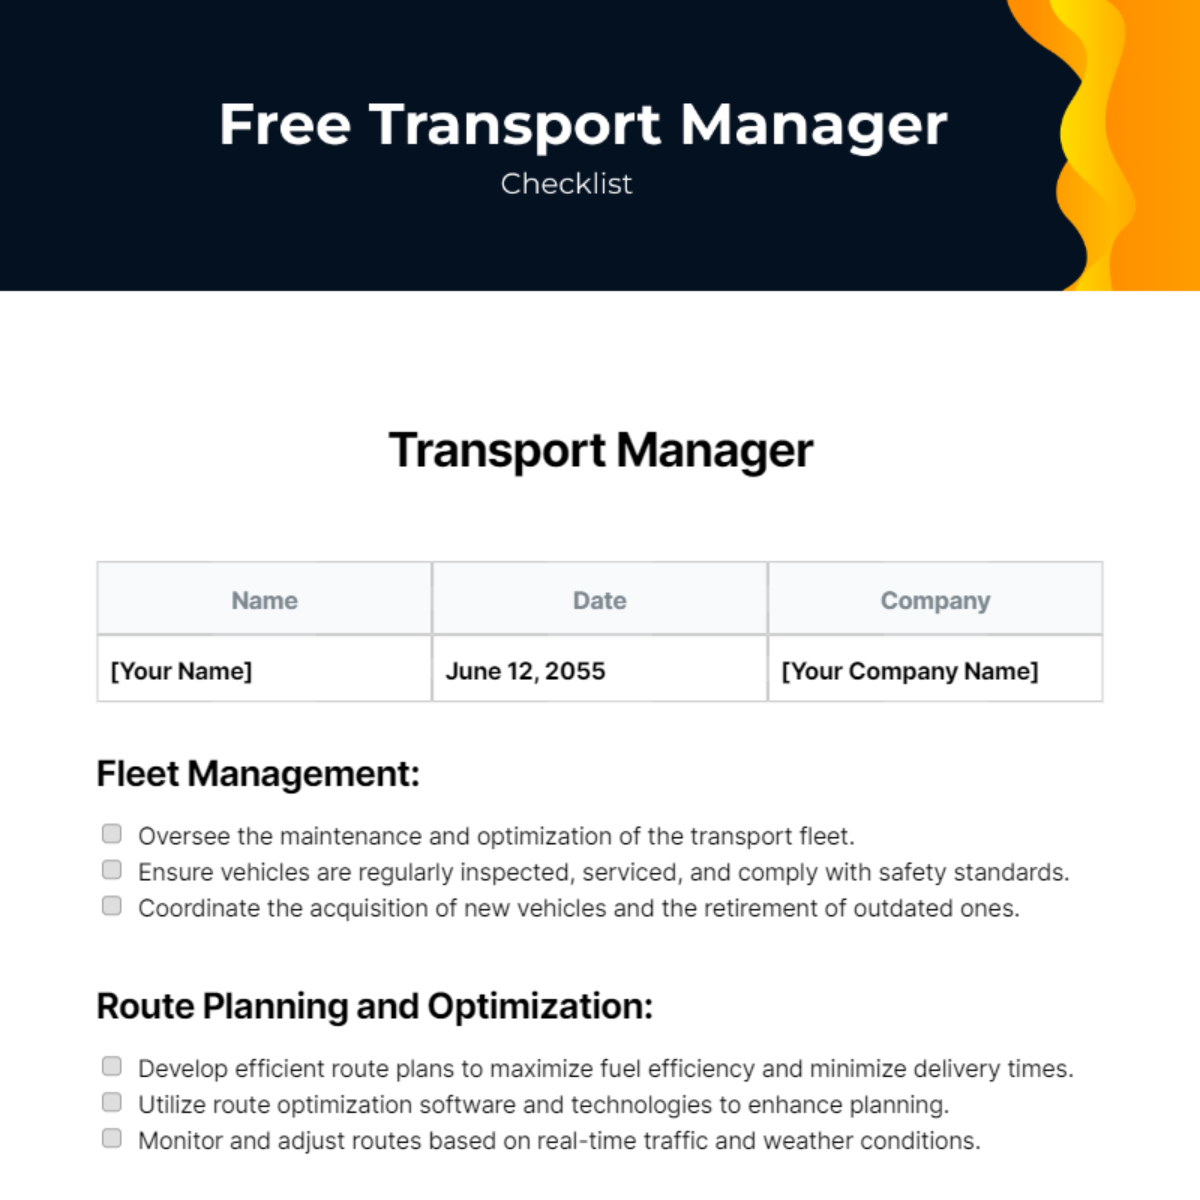 Transport Manager Checklist Template